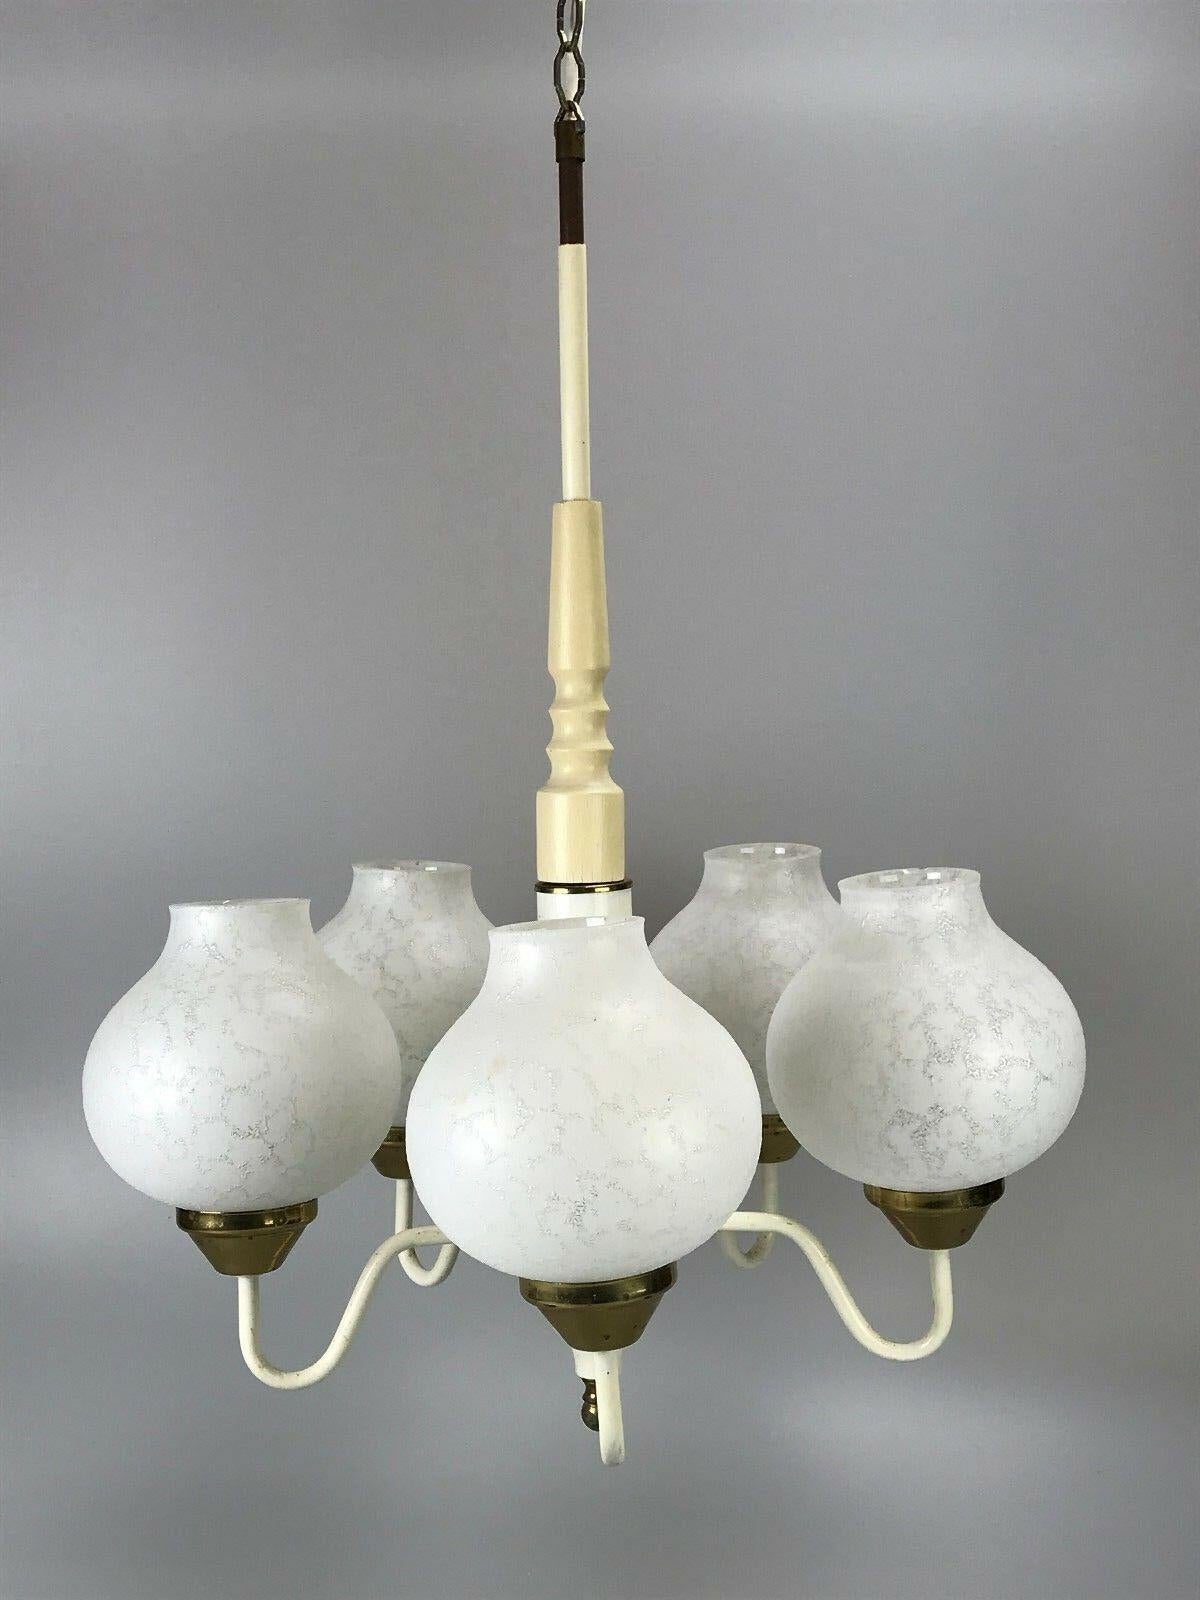 70s lamp light ceiling lamp hanging lamp chandelier space age design

Object: hanging lamp

Manufacturer:

Condition: good

Age: around 1960-1970

Dimensions:

Diameter = 39cm
Hanging height = 95cm

Other notes:

The pictures serve